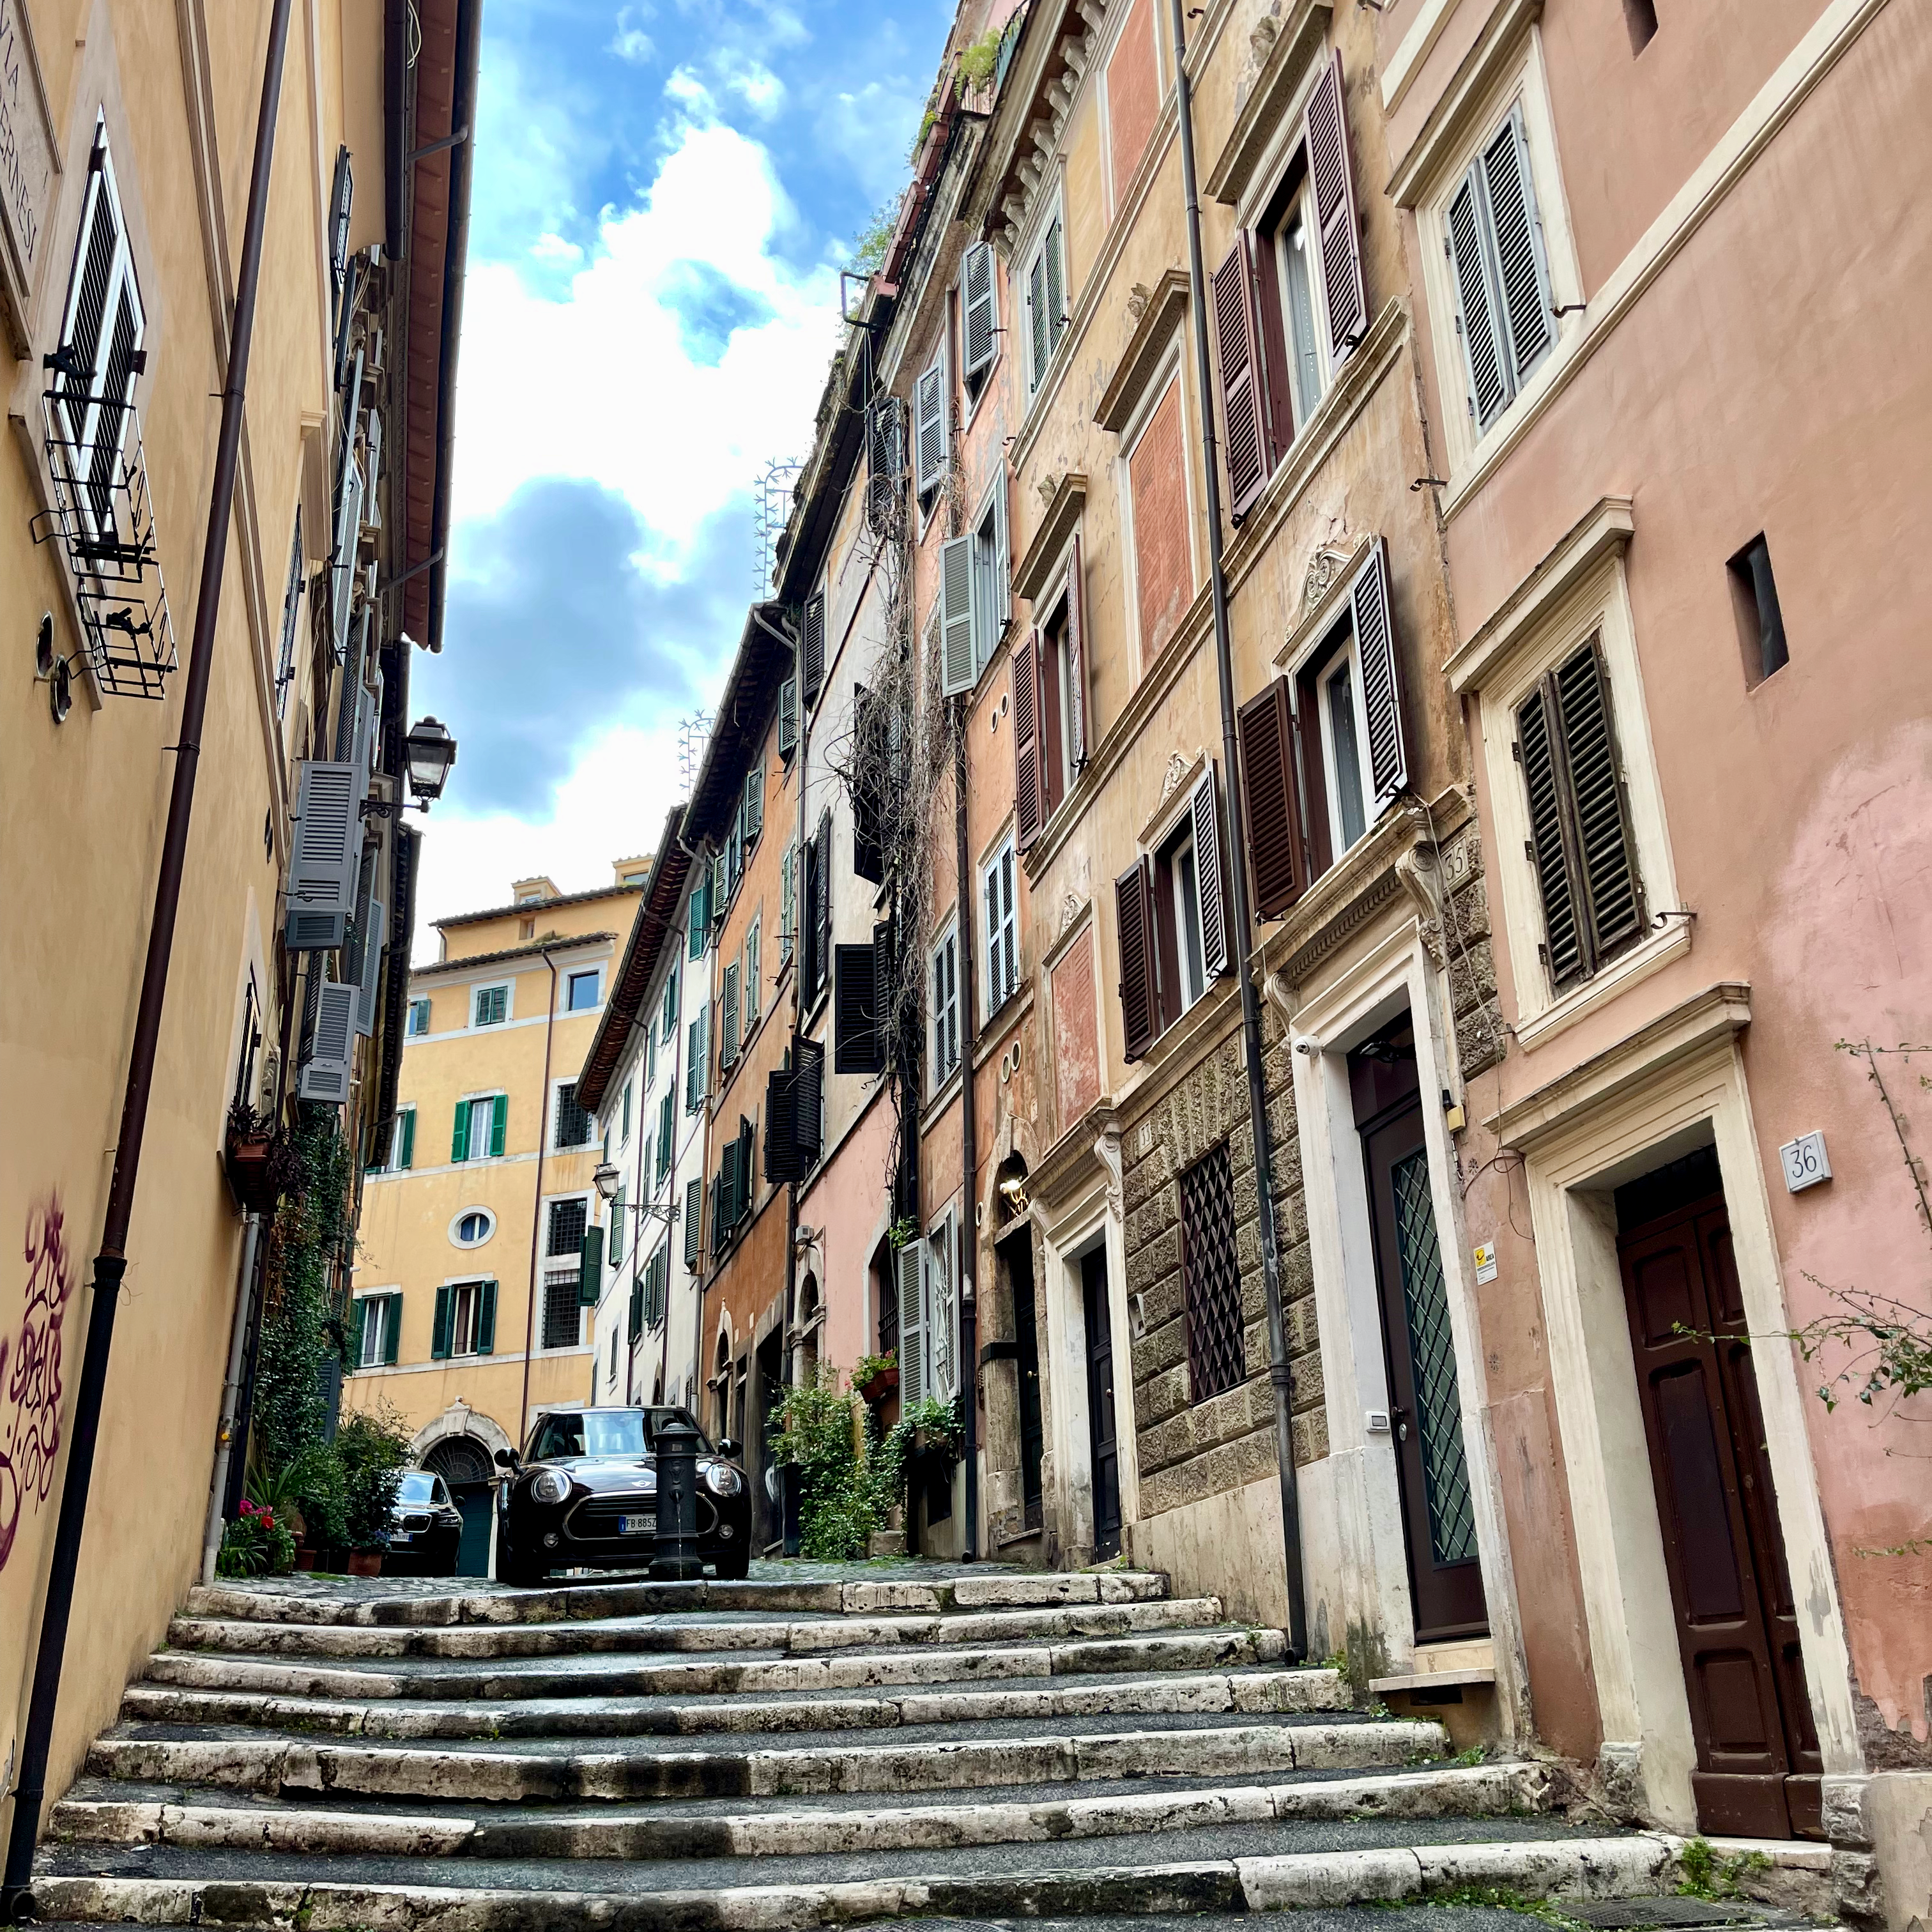 Photograph of charming alleyway in Rome, Italy. Featuring stone and concrete stairs and a parked mini cooper. 